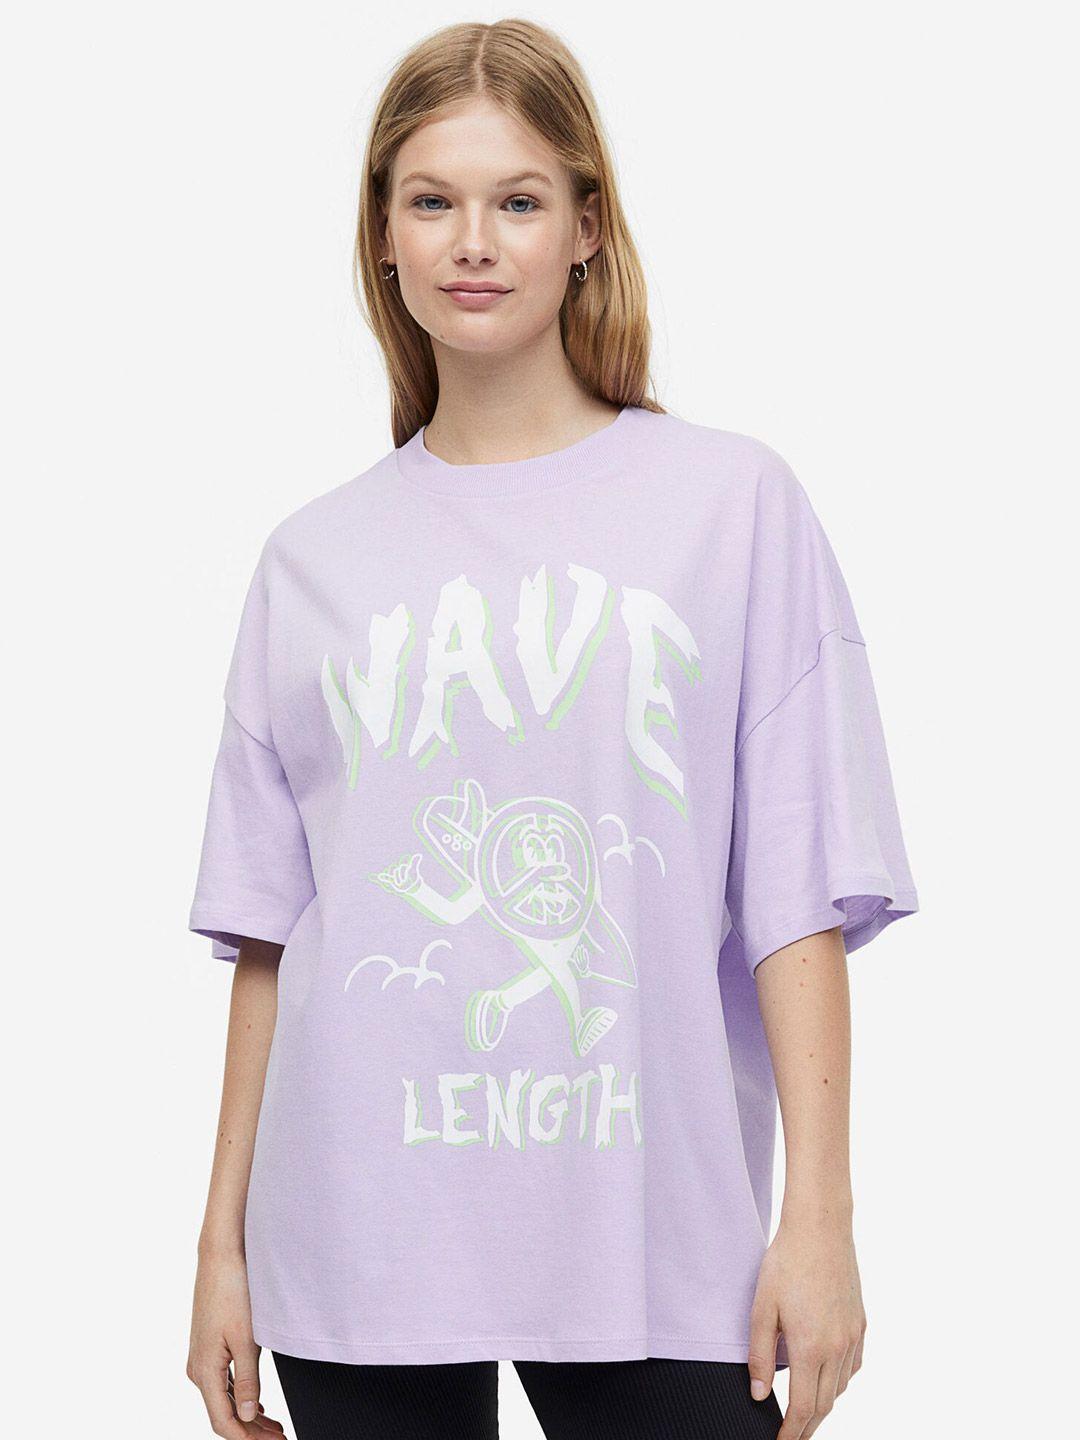 h&m oversized printed pure cotton t-shirt